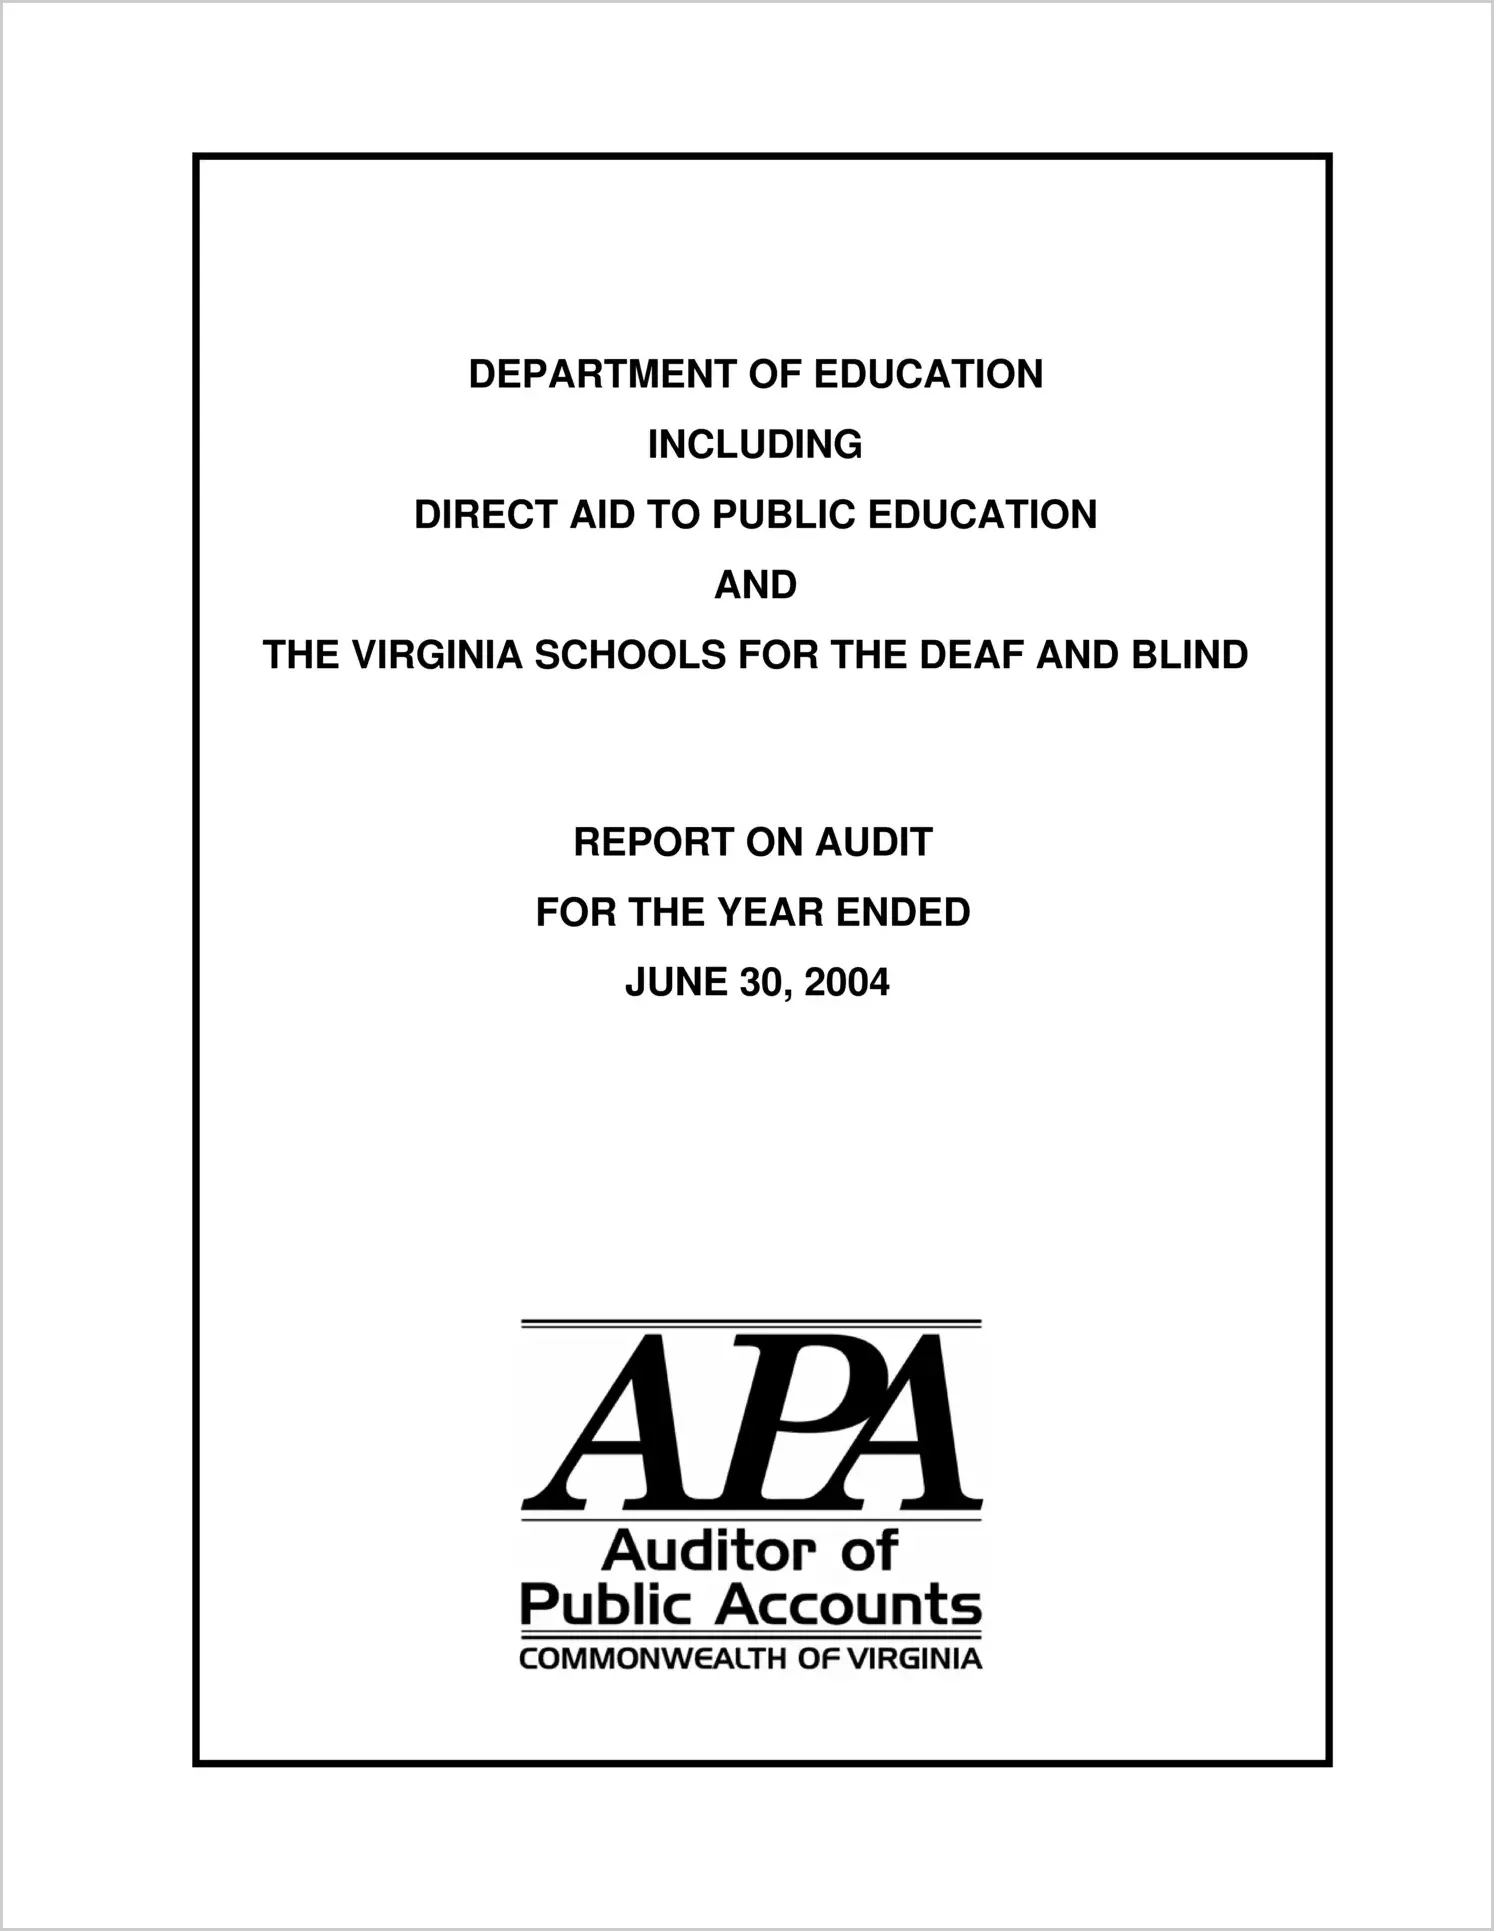 Department of Education Including Direct Aid to Public Education and the Virginia Schools for the Deaf and Blind for the year ended June 30, 2004